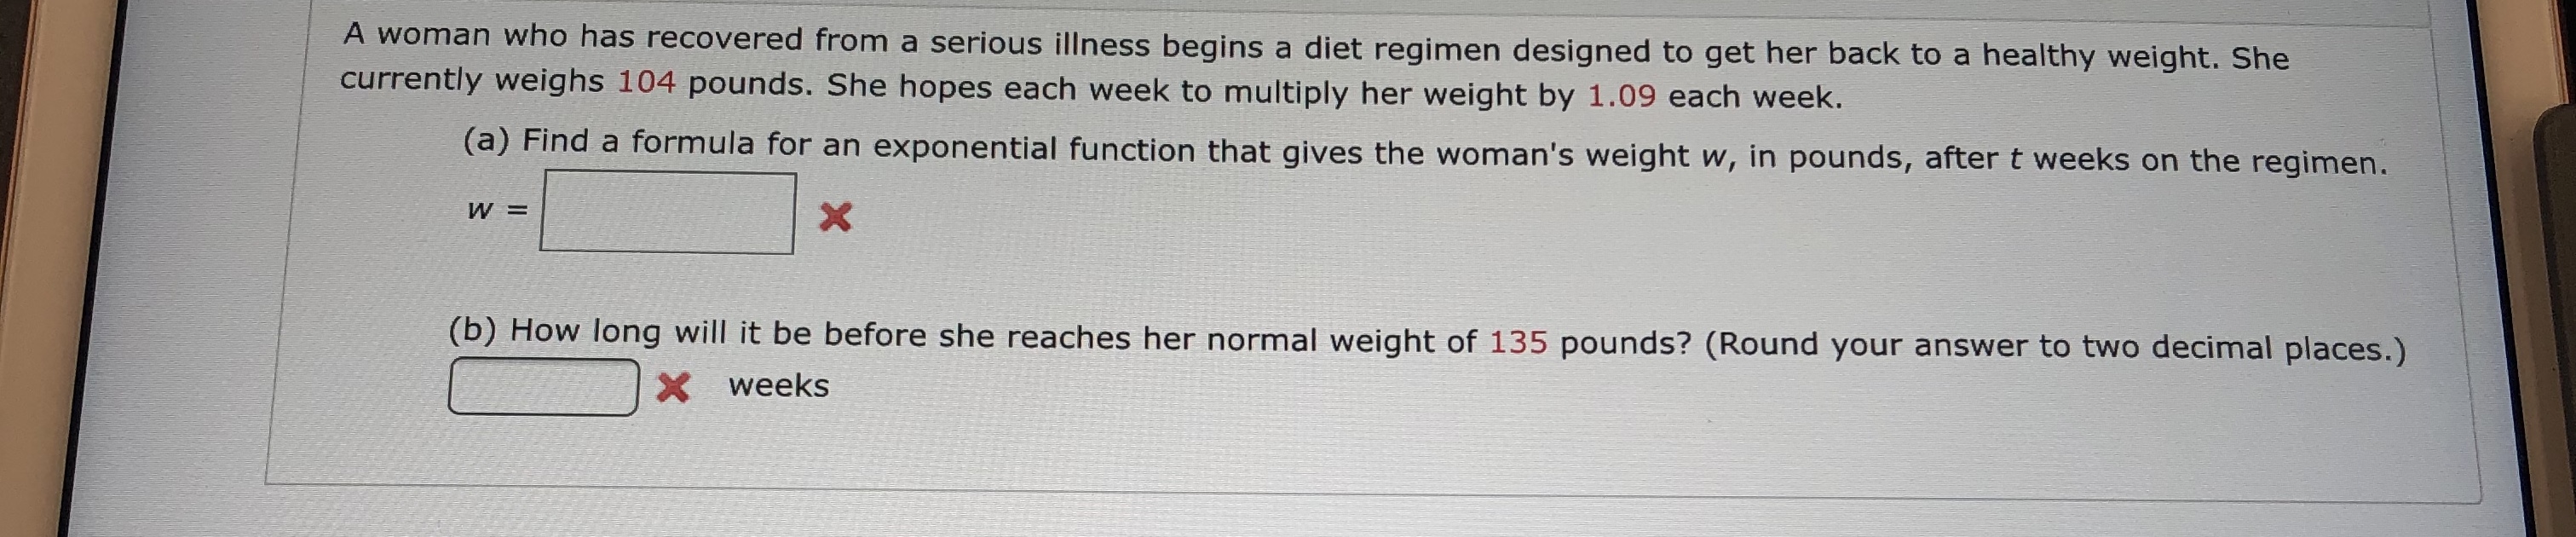 A woman who has recovered from a serious illness begins a diet regimen designed to get her back to a healthy weight. She
currently weighs 104 pounds. She hopes each week to multiply her weight by 1.09 each week.
(a) Find a formula for an exponential function that gives the woman's weight w, in pounds, after t weeks on the regimen.
W =
X
(b) How long will it be before she reaches her normal weight of 135 pounds? (Round your answer to two decimal places.)
Xweeks
